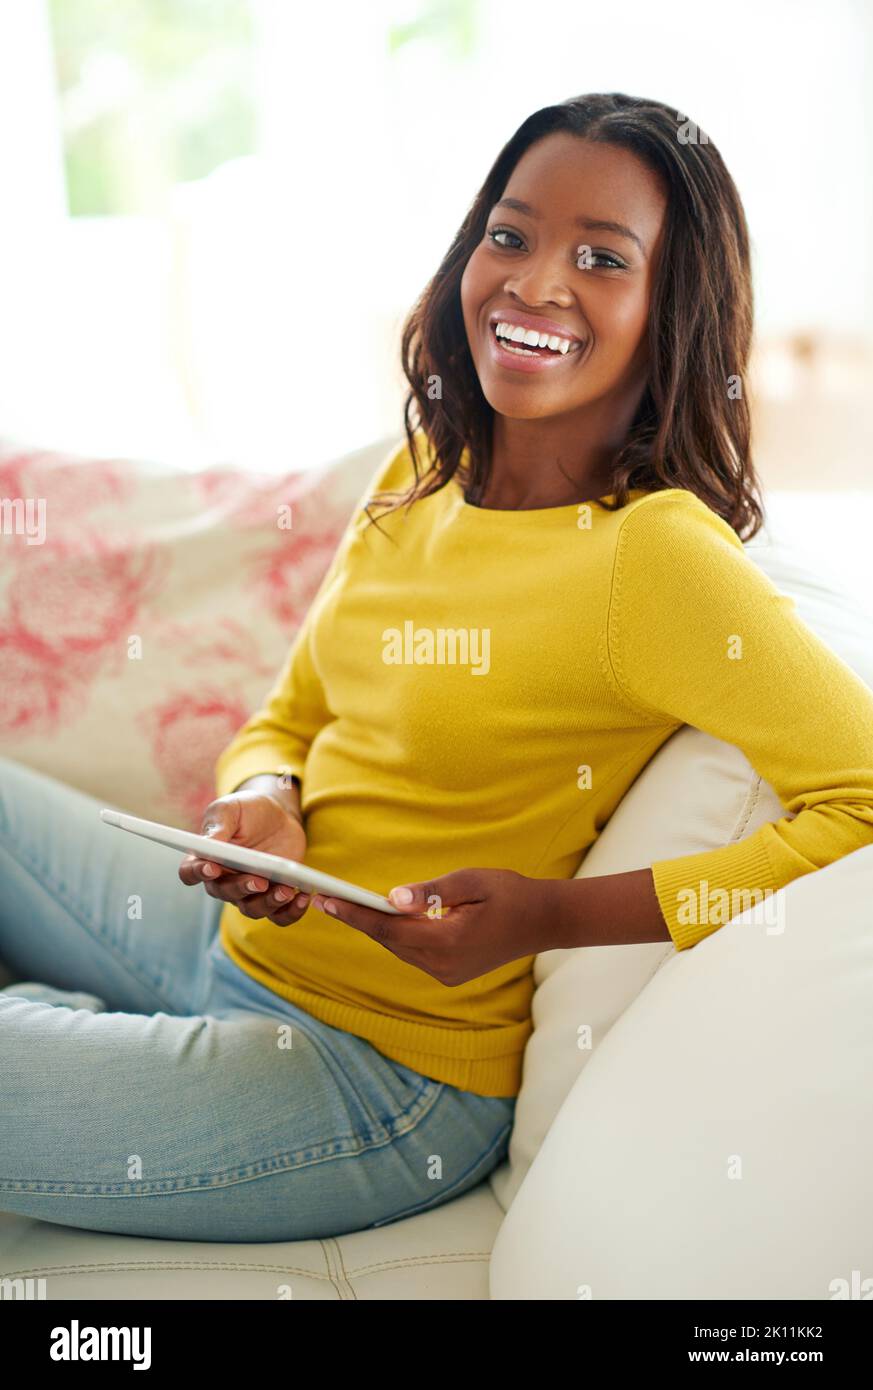 Everything at the touch of a button. Portrait of an attractive young woman using a digital tablet relaxing at home. Stock Photo